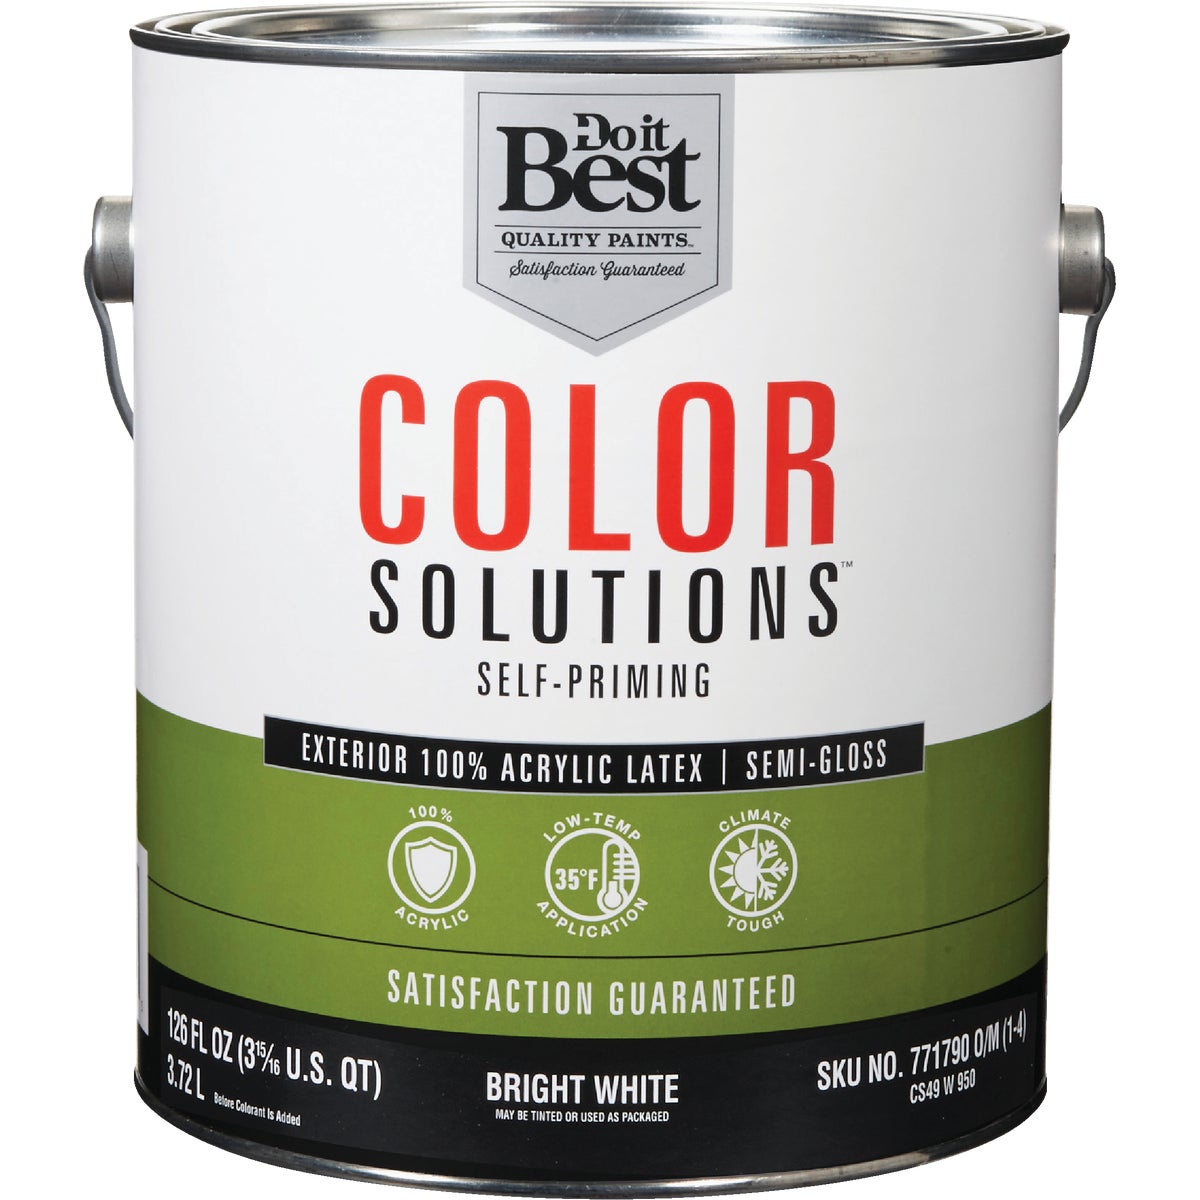 Item 771790, This paint is formulated with 100% acrylic resins for durability and color 